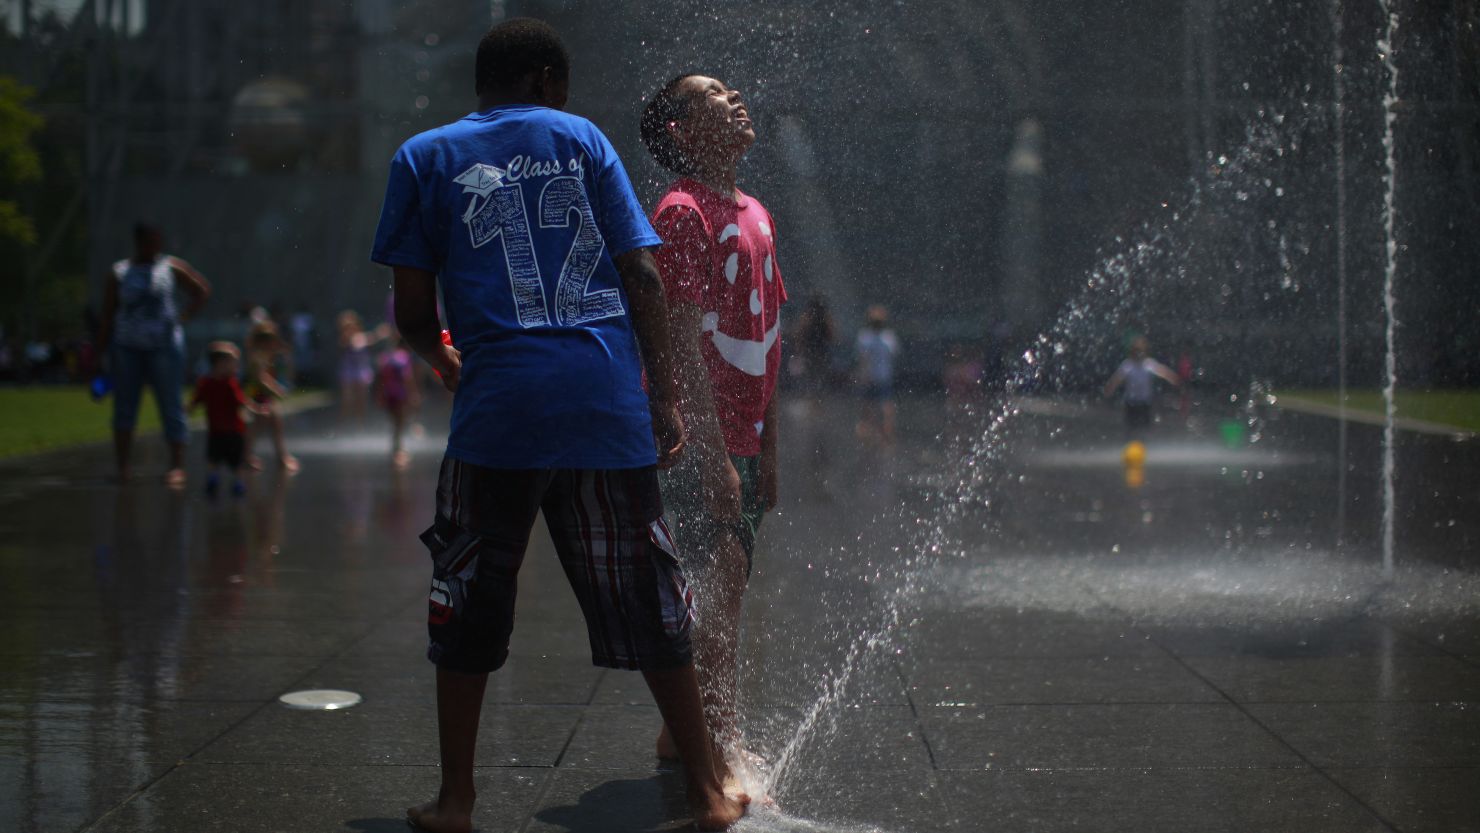 Children play at a fountain Wednesday in New York, where temperatures reached the mid-90s.